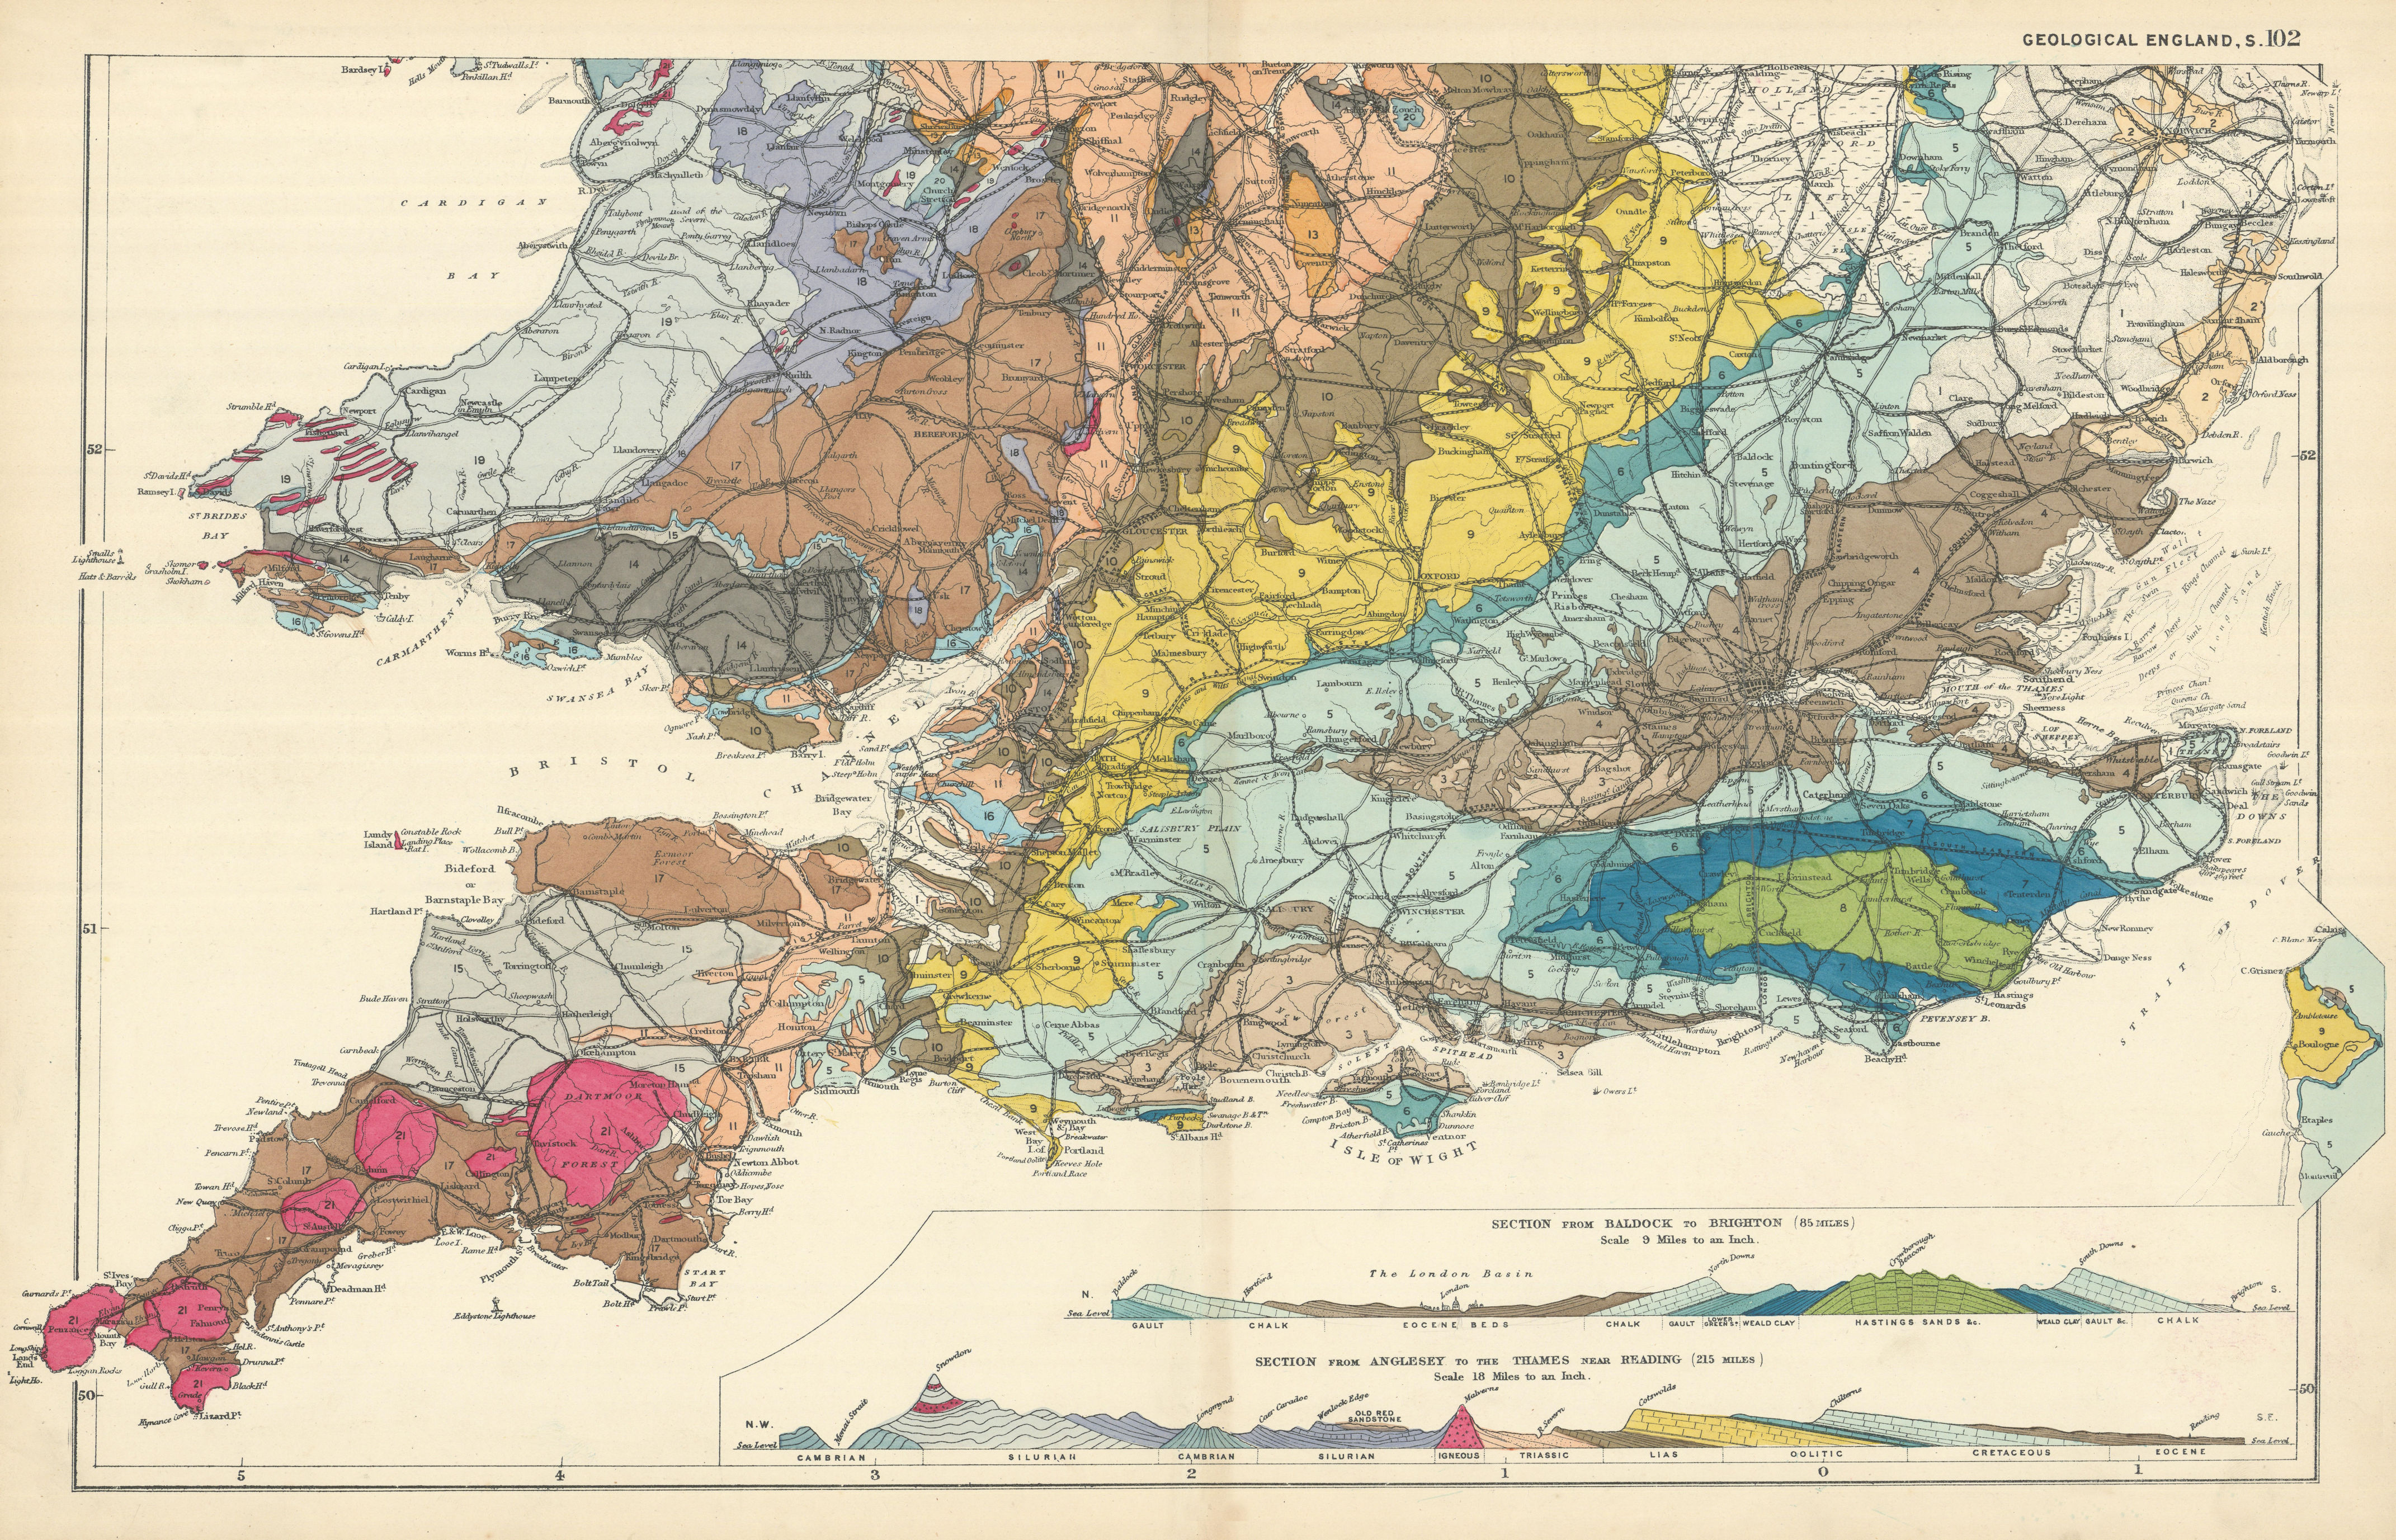 Associate Product GEOLOGICAL ENGLAND & WALES (South sheet) antique map by GW BACON 1898 old